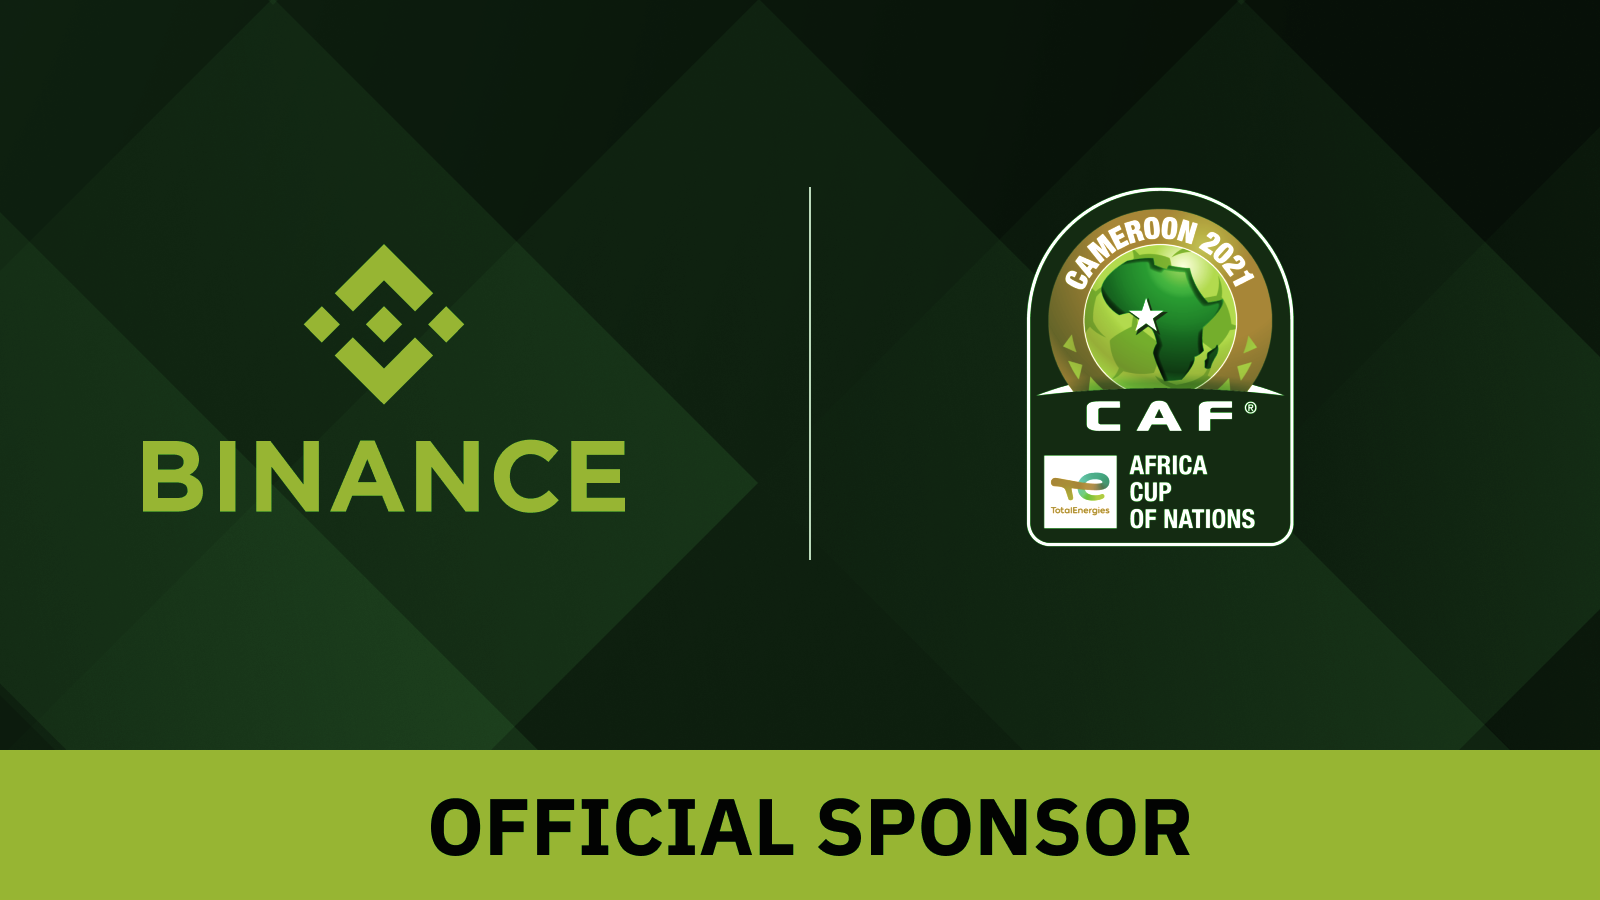 Binance becomes the official sponsor of AFCON. Image: Confederation of African Football